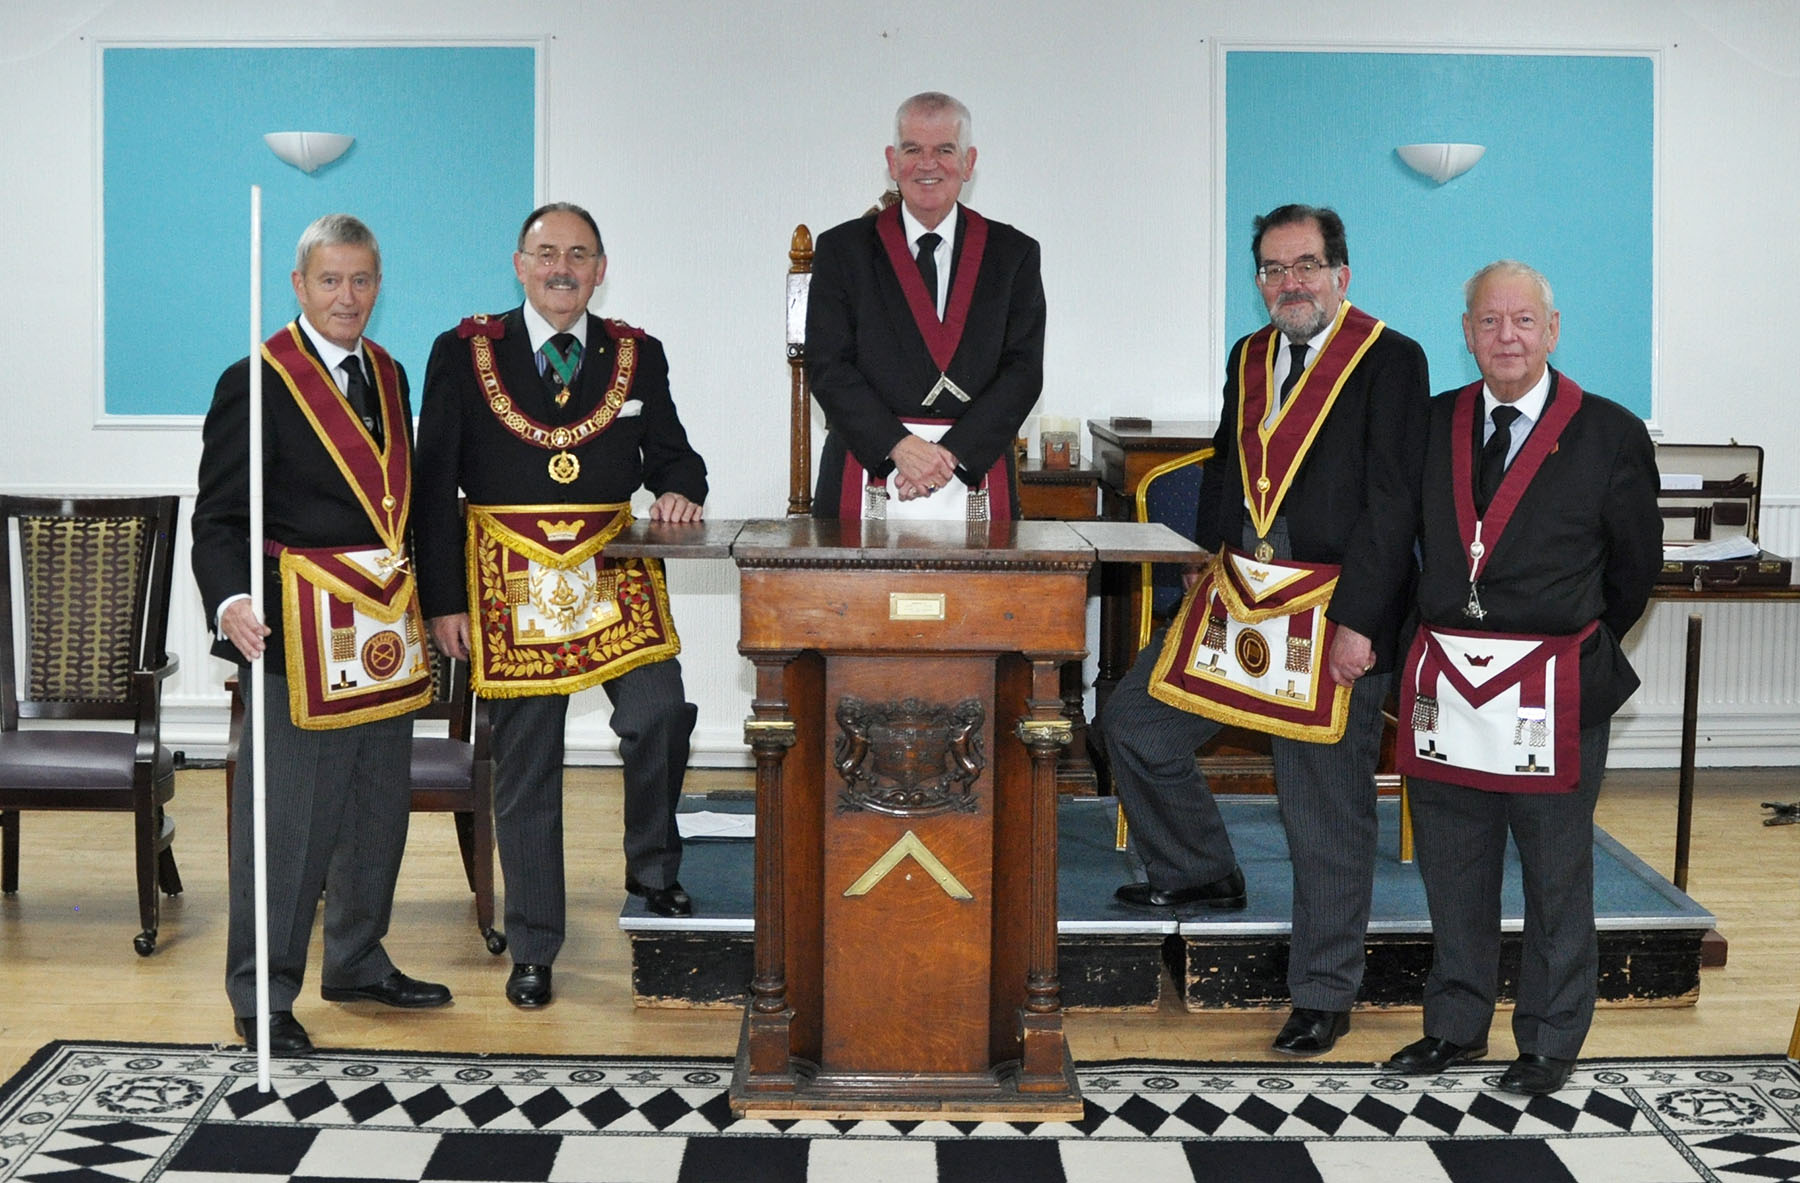 The Installation Meeting of the Sword of Constantine Court